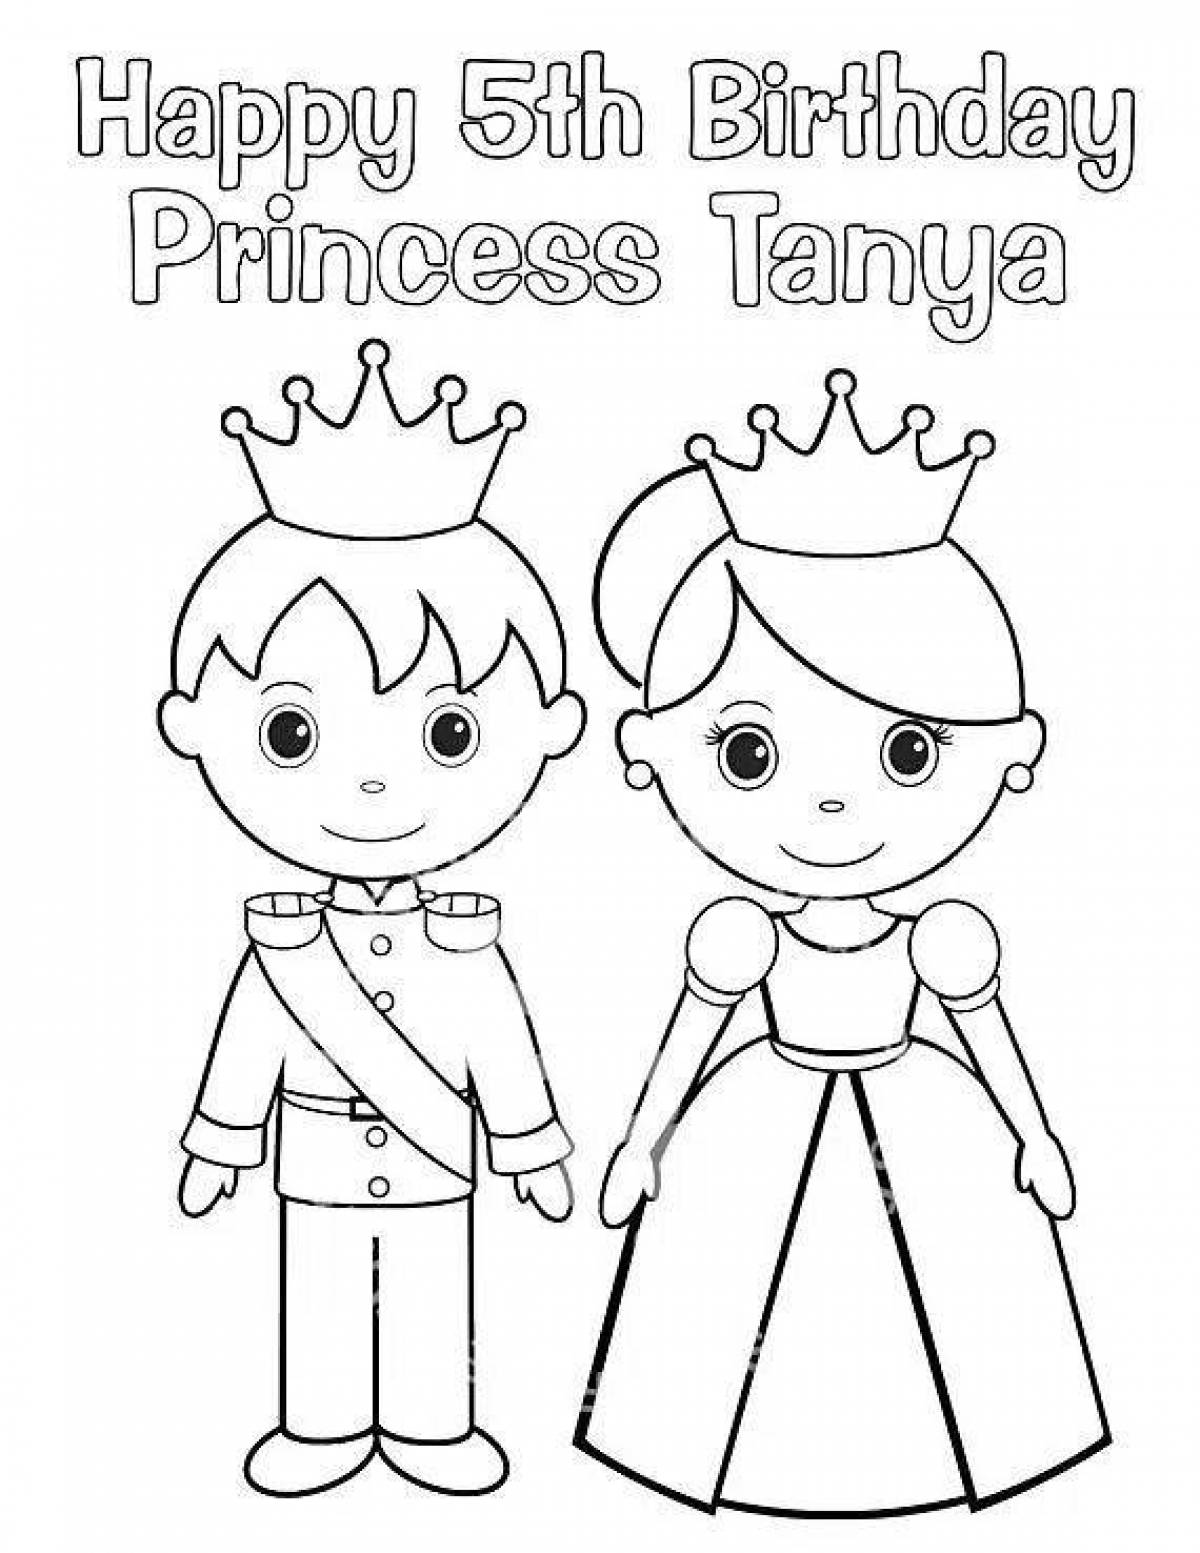 Generous princess and prince coloring book for kids